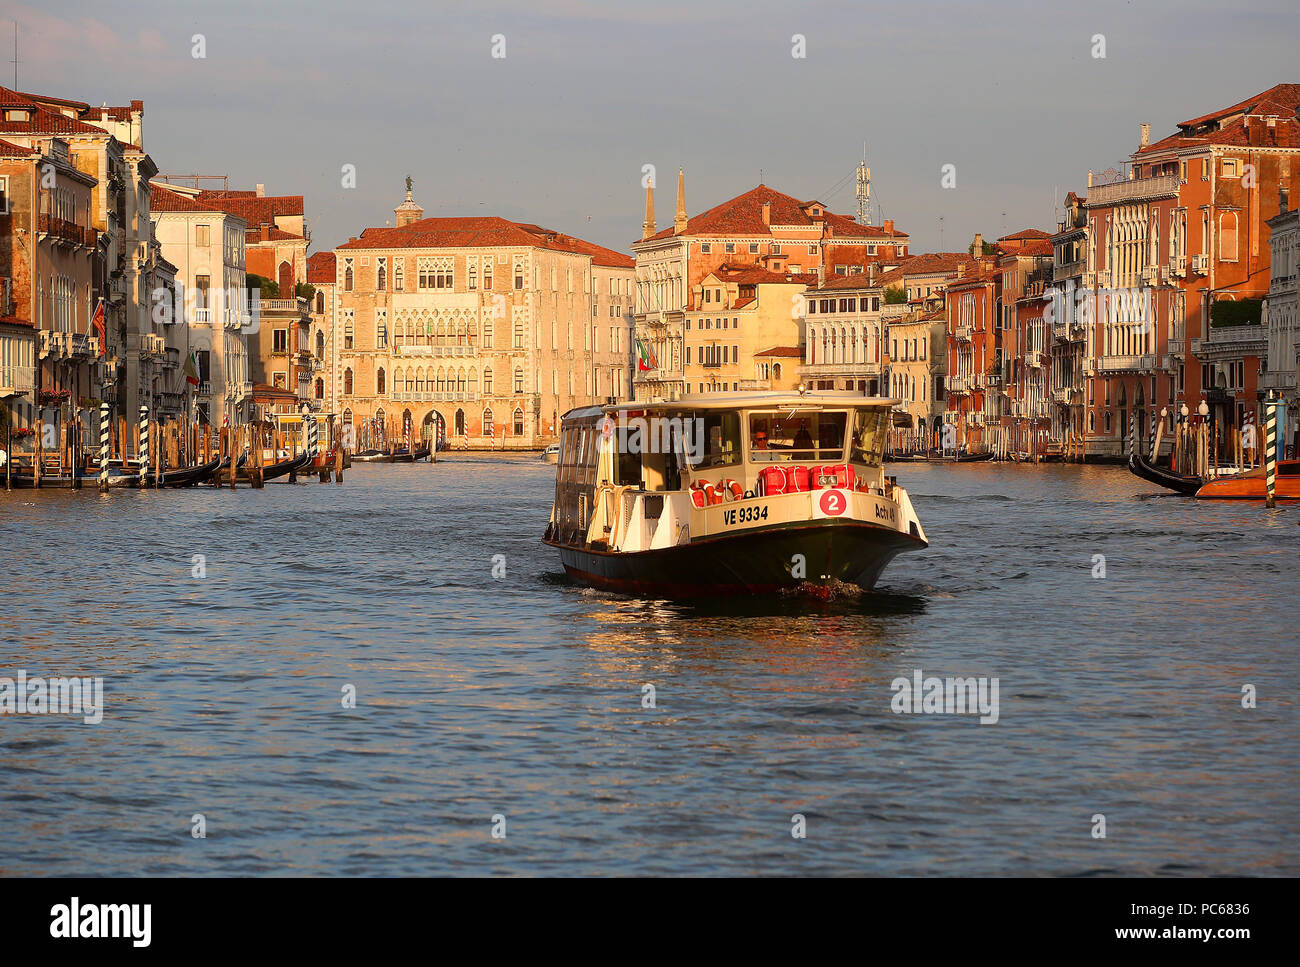 Venice, Italy. 8th July, 2018. The Grand Canal in Venice, Italy. Venice, the capital of northern Italy's Veneto region, is built on more than 100 small islands in a lagoon in the Adriatic Sea. It has no roads, just canals ""“ including the Grand Canal thoroughfare ""“ lined with Renaissance and Gothic palaces. Credit: Leigh Taylor/ZUMA Wire/Alamy Live News Stock Photo